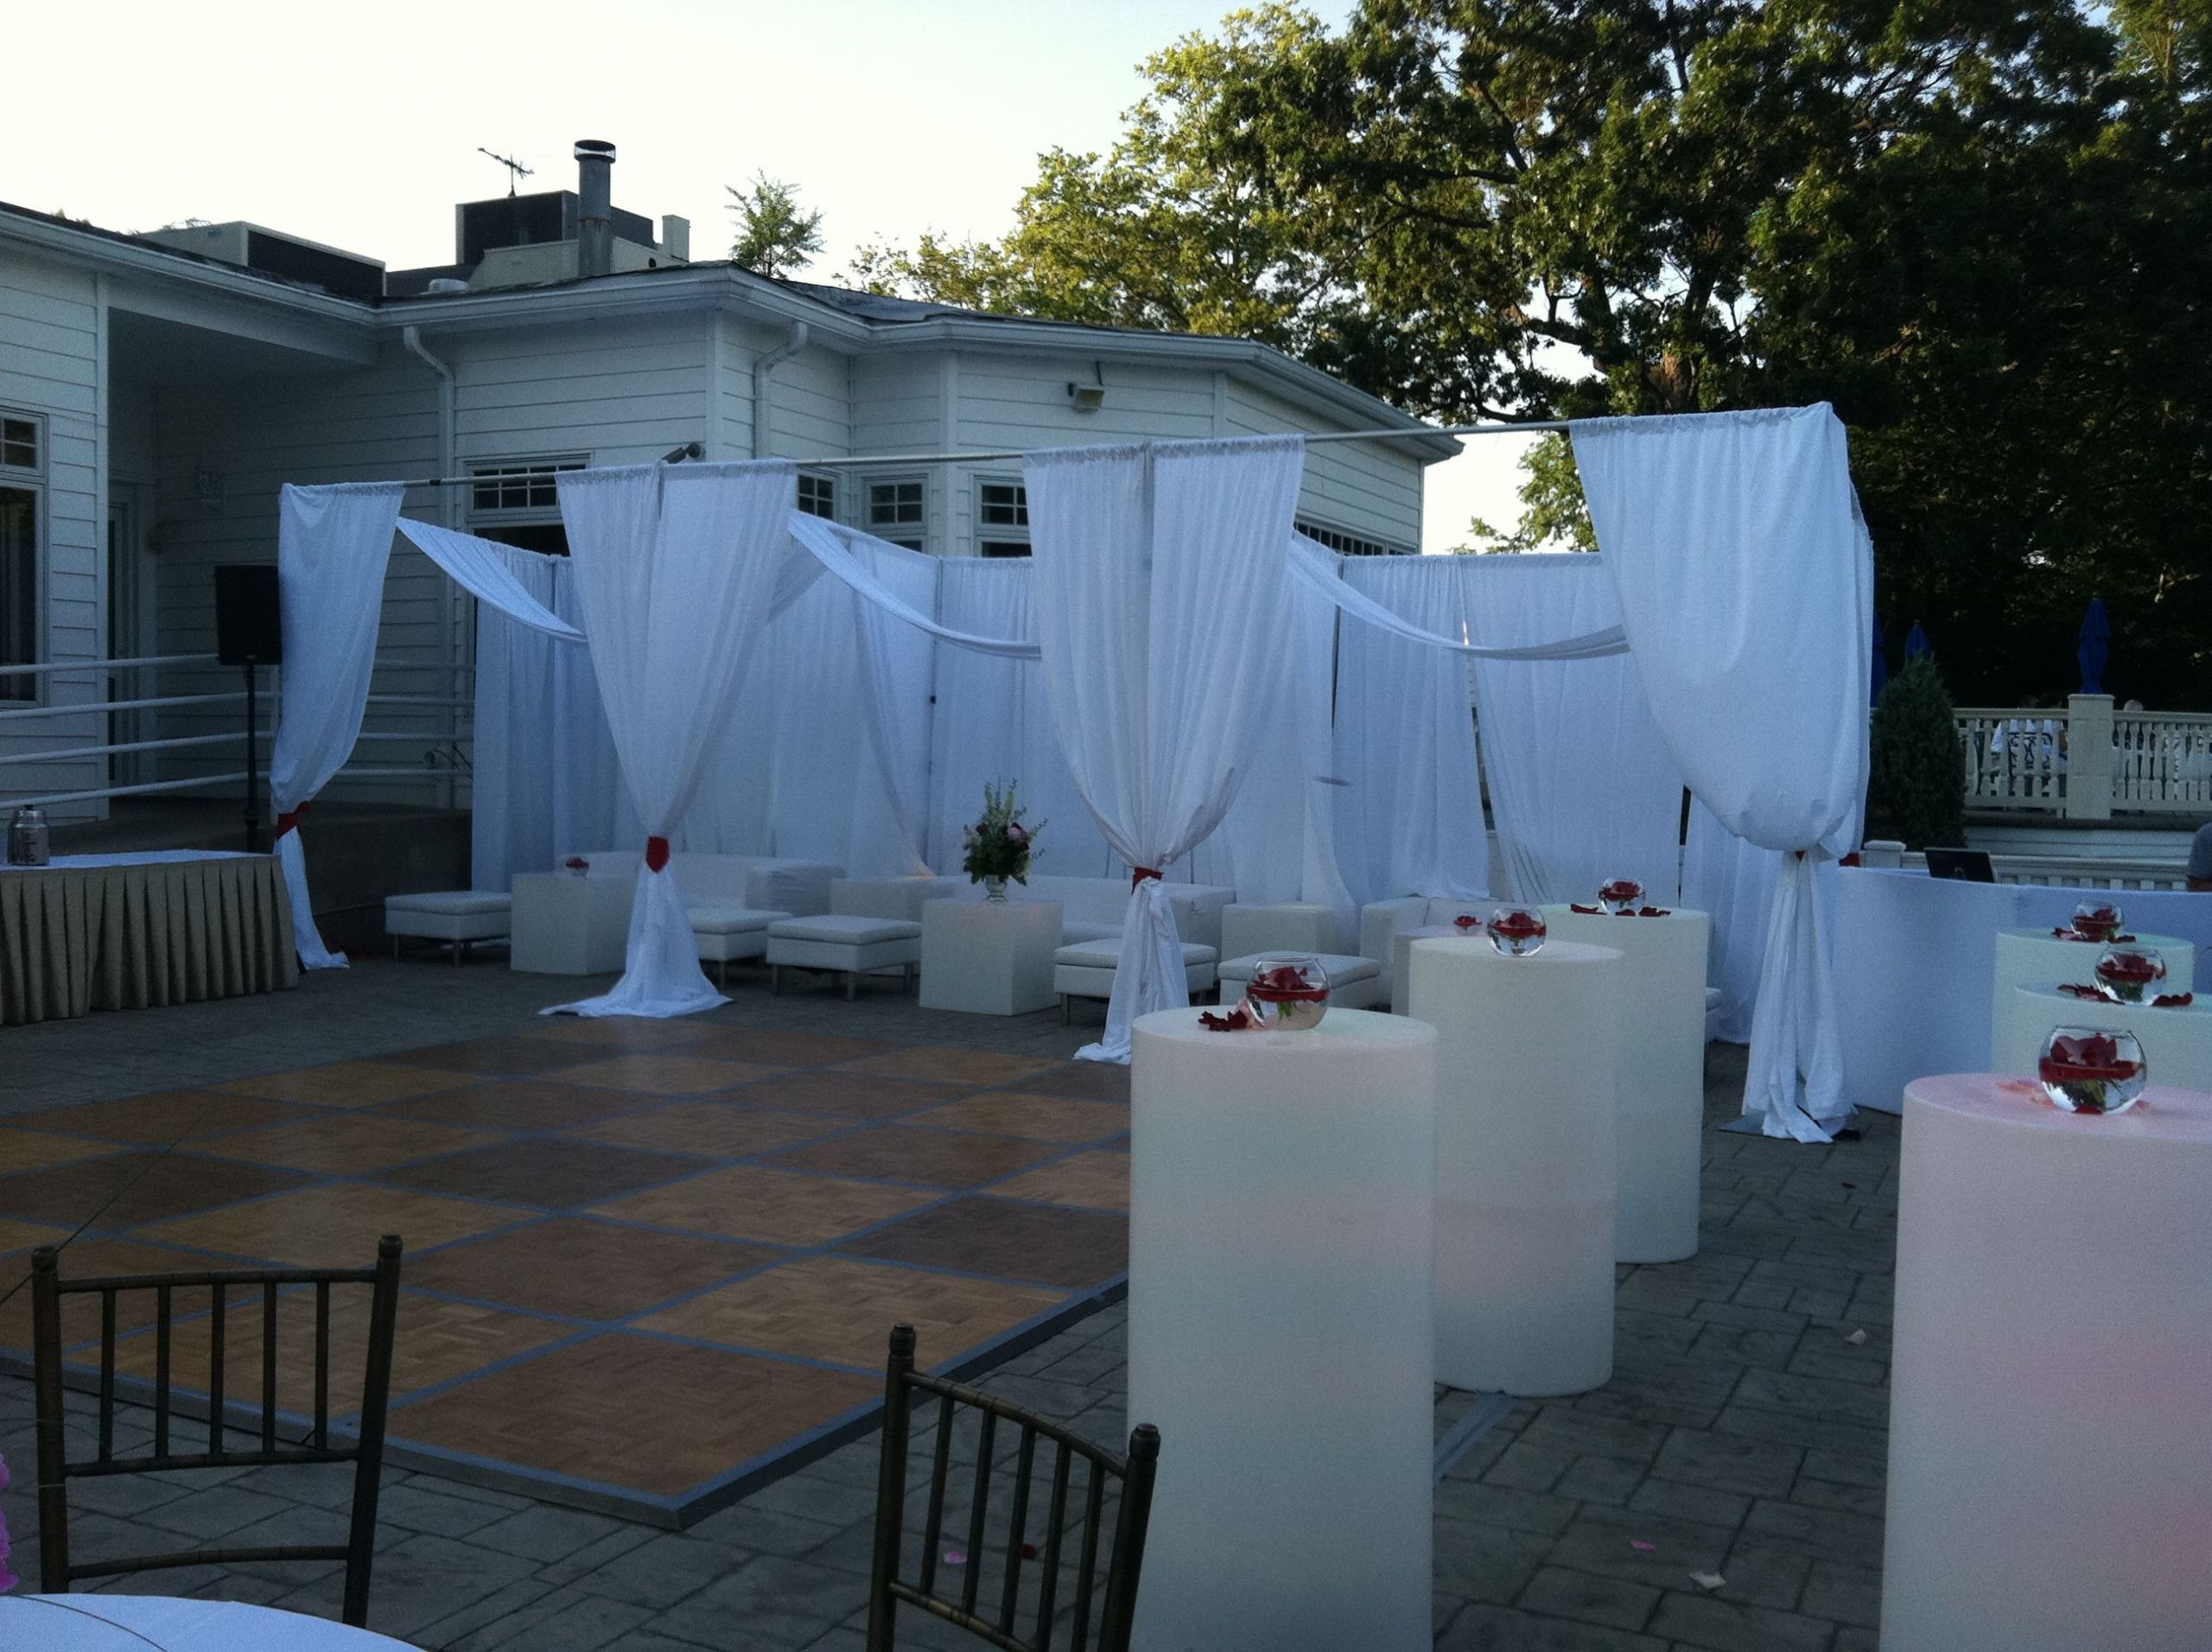 All White Birthday Party Ideas
 looking to have an all white party need ideas wanna rent